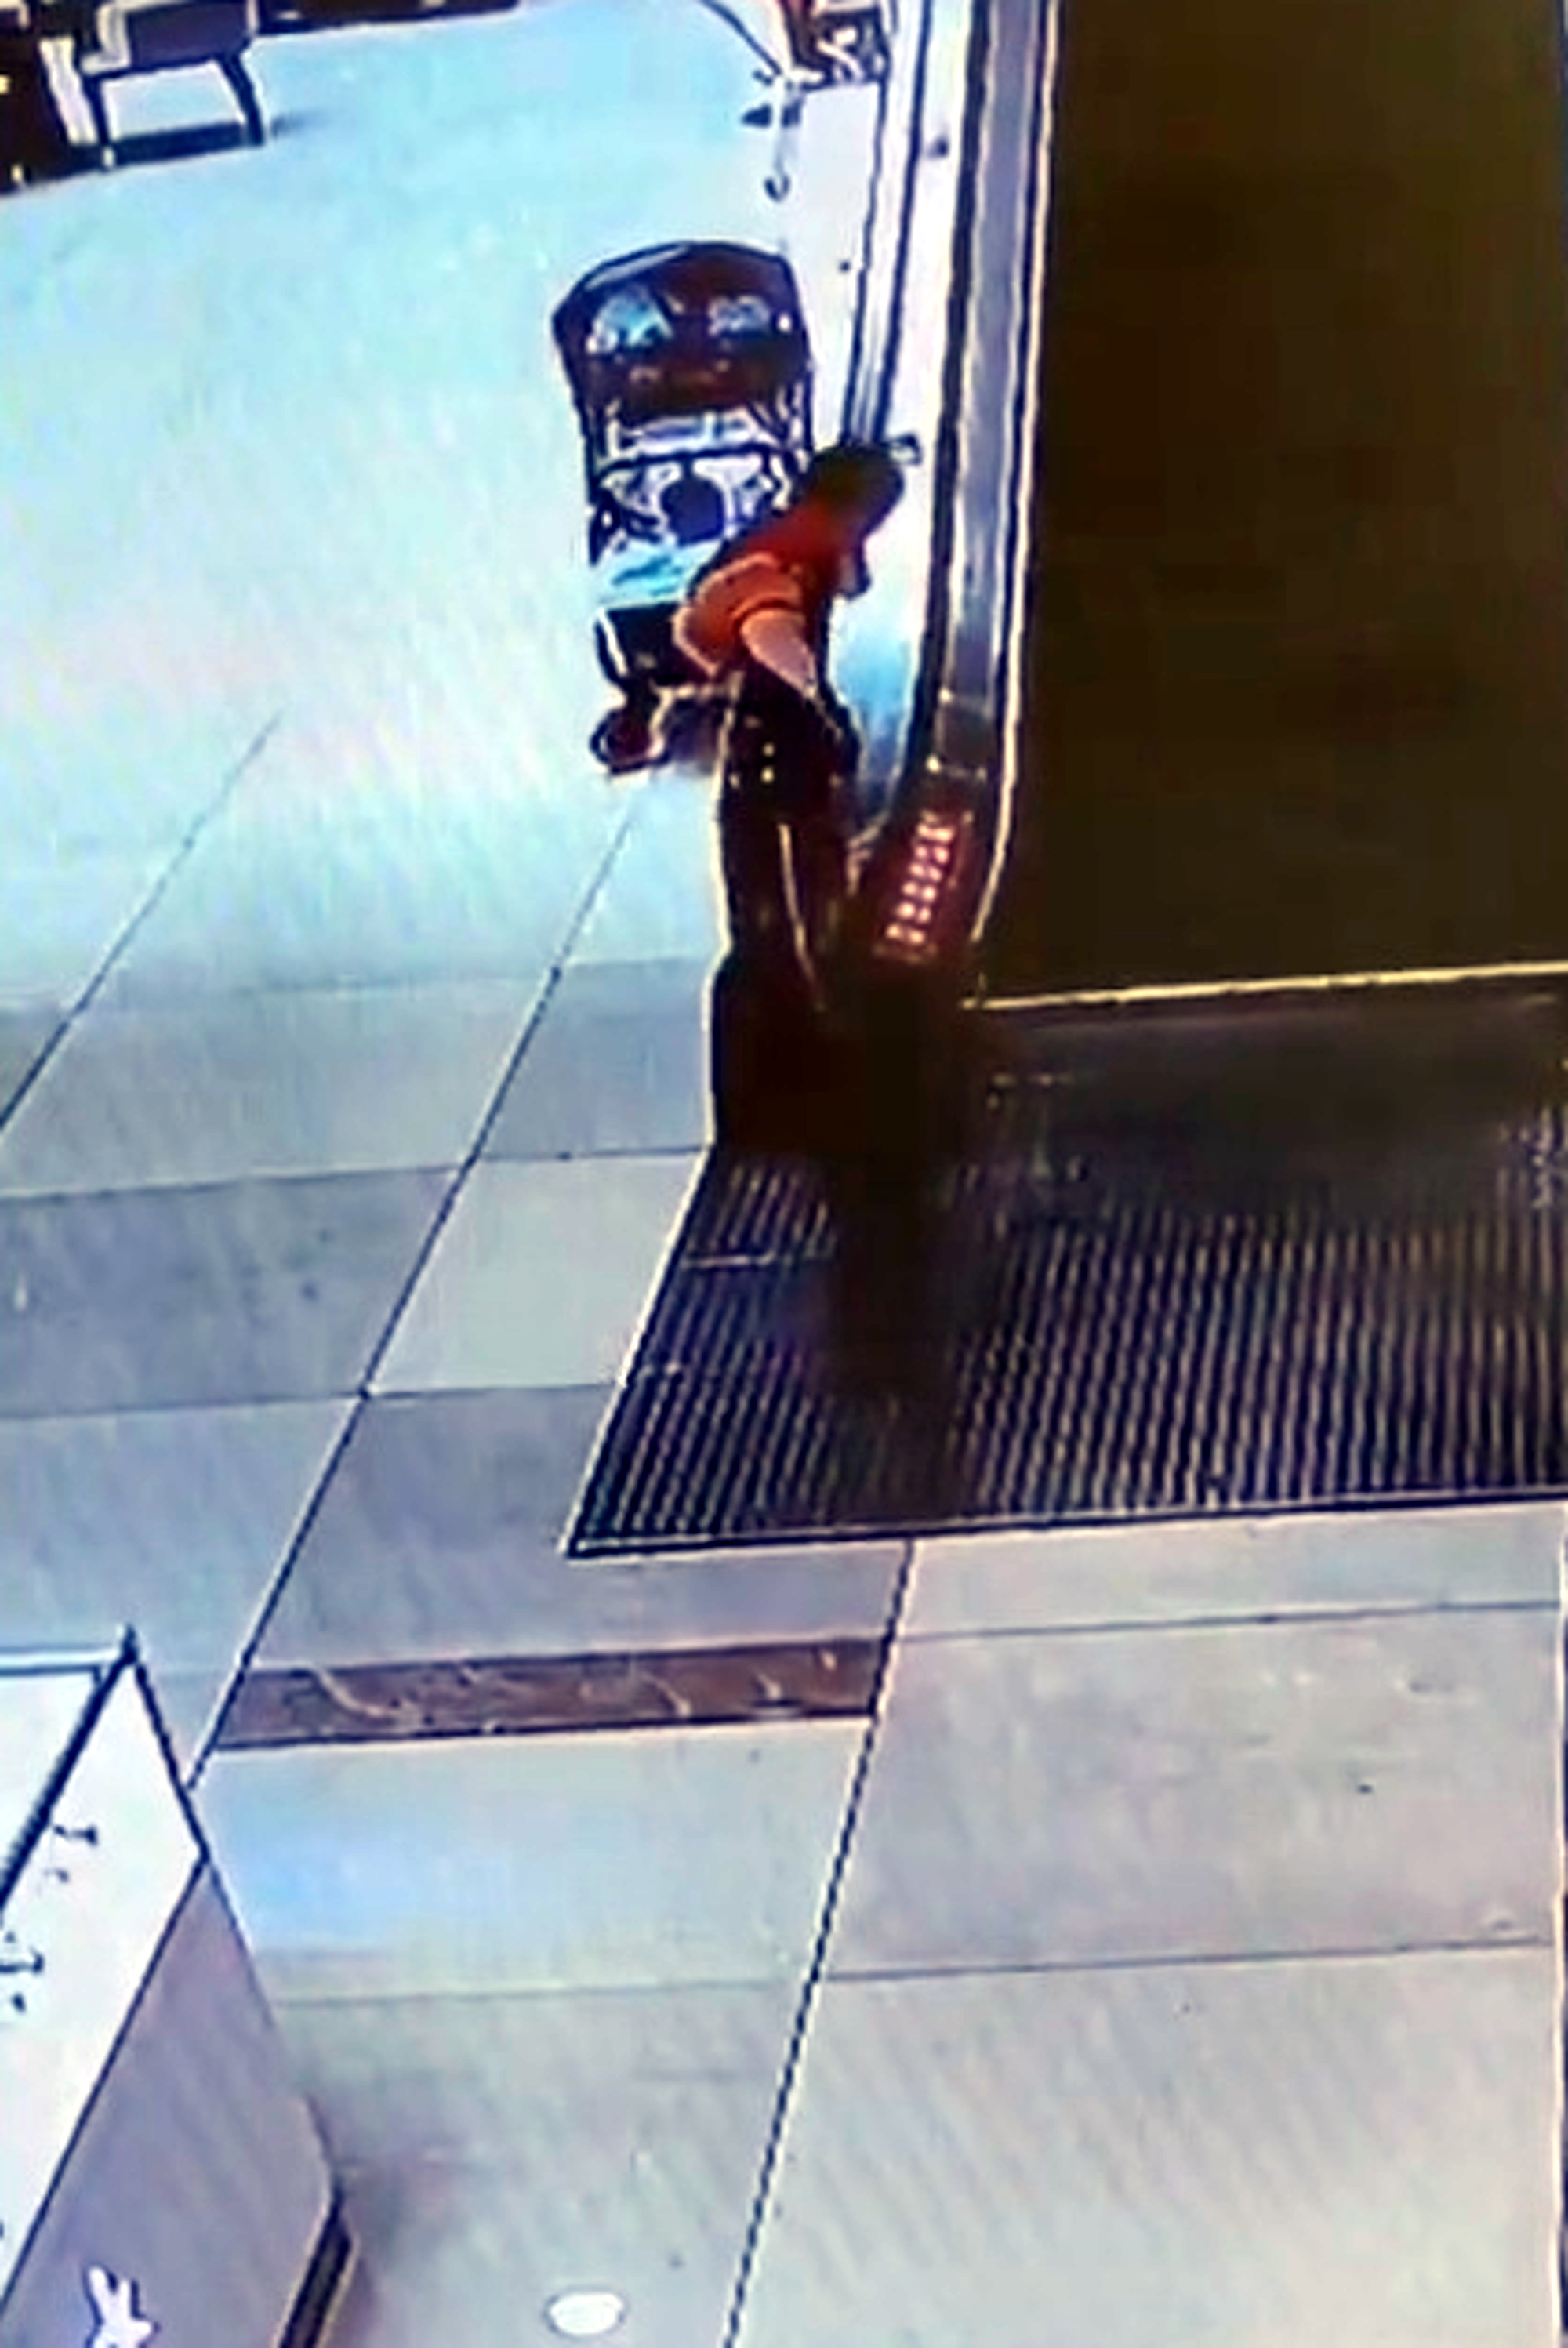 Read more about the article Tot Trapped On Escalator Handrail Saved At Last Minute